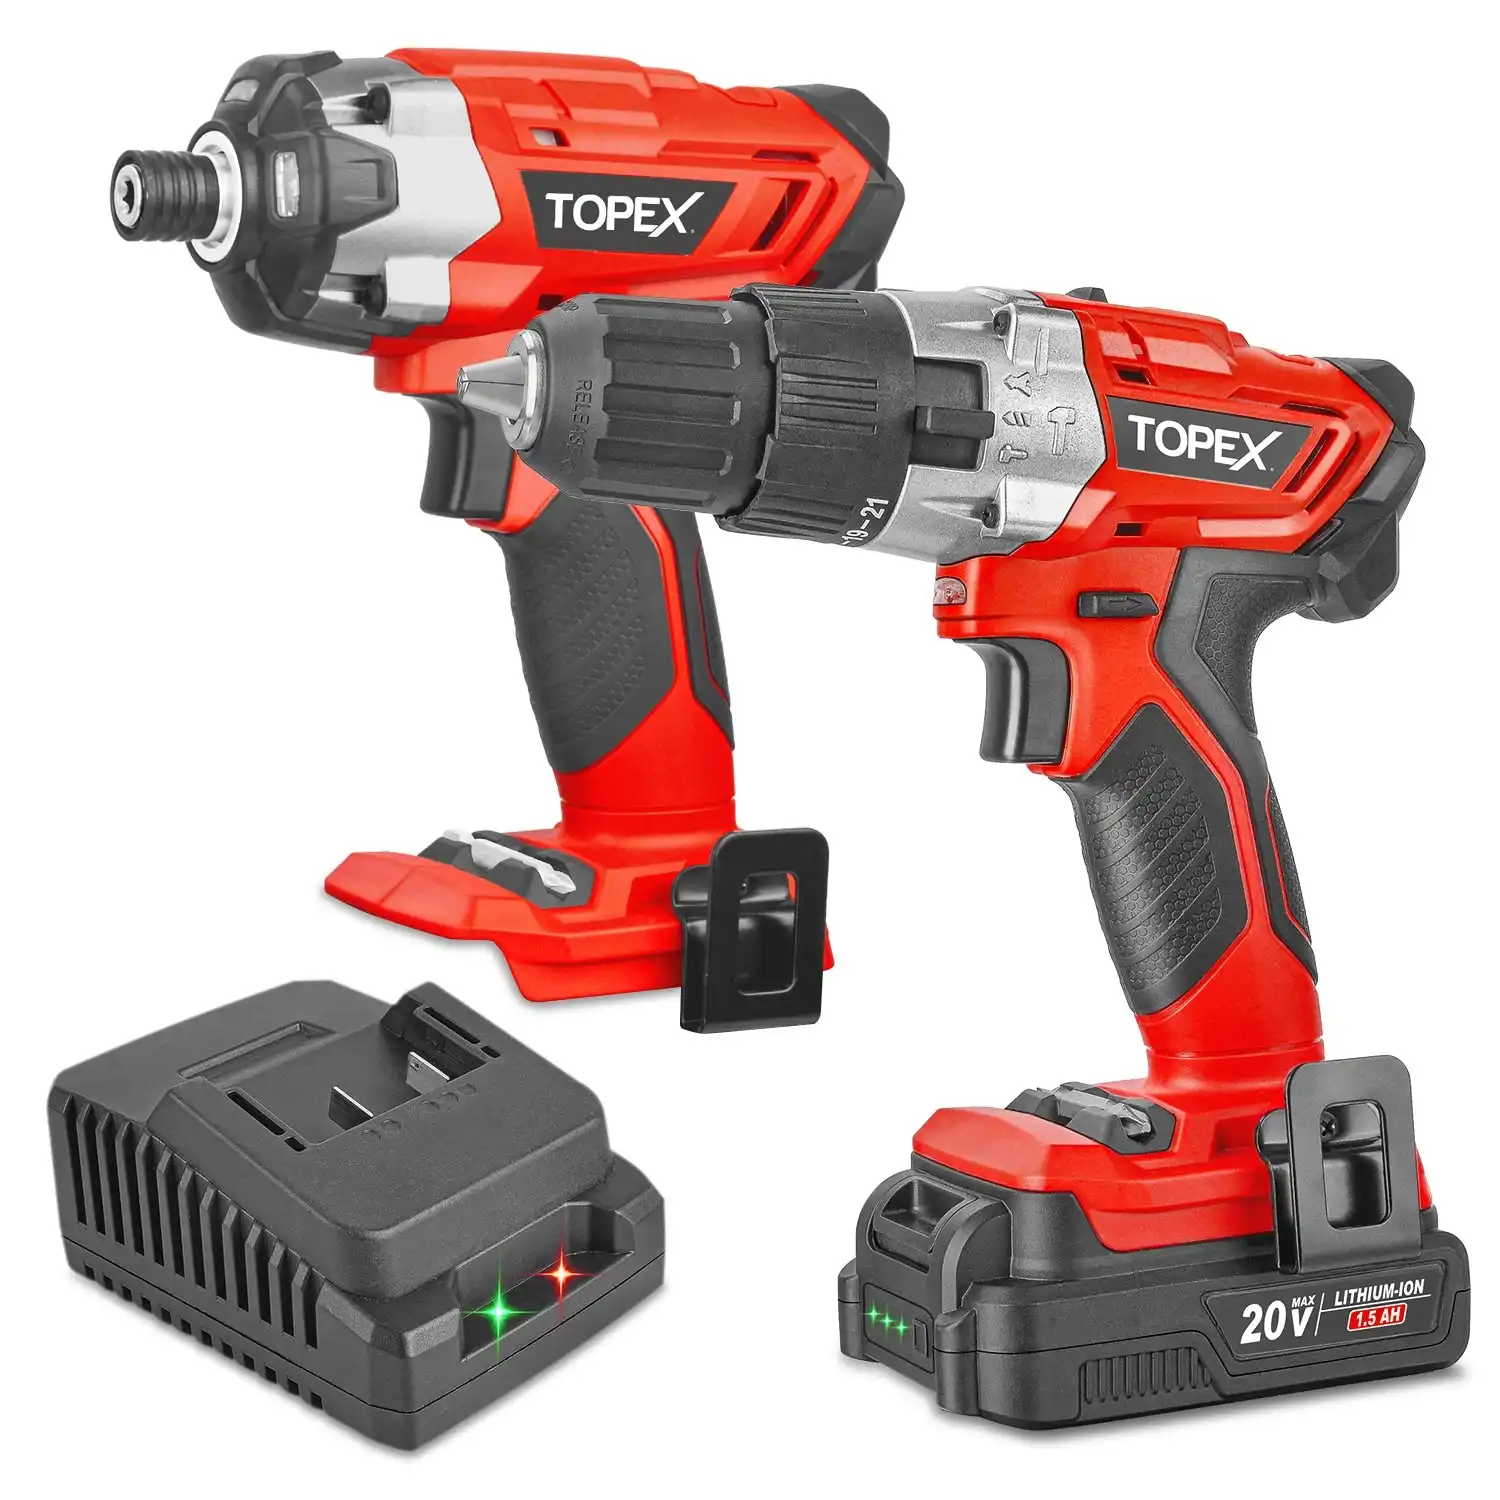 Topex 20V Cordless Combo Kit Hammer Drill & Impact Driver w/ Fast Charger